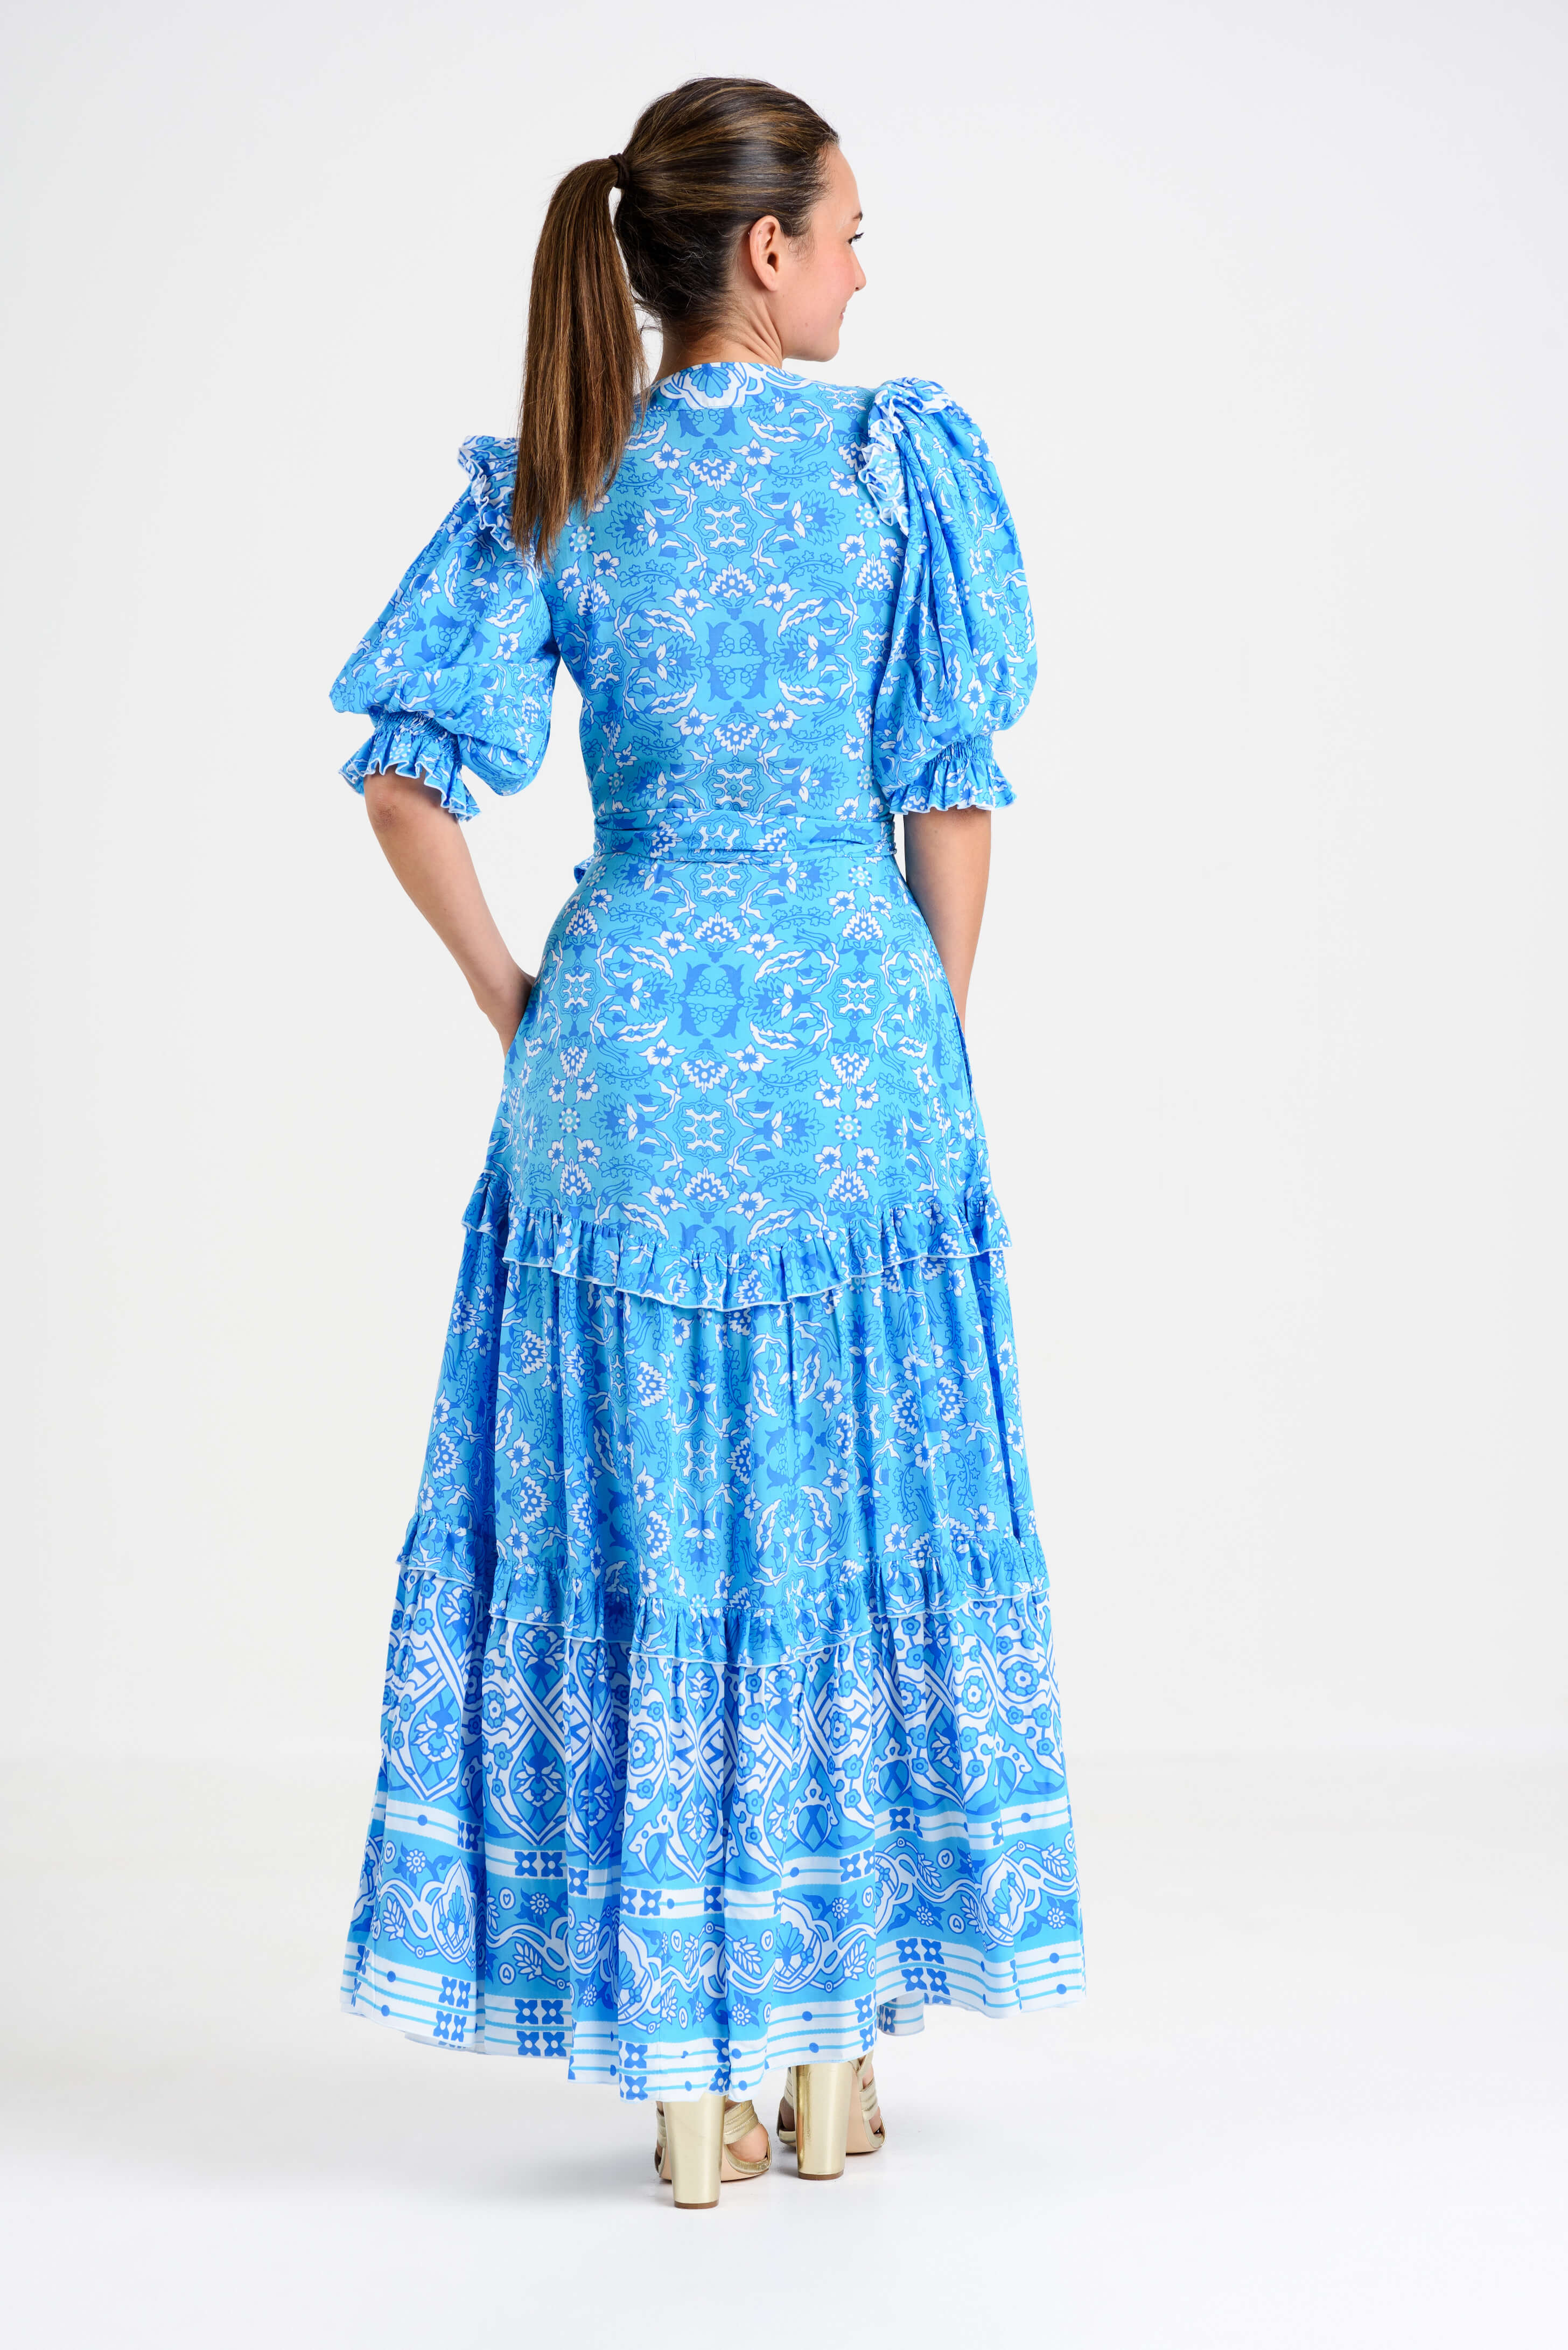 Feather and Find blue maxi dress